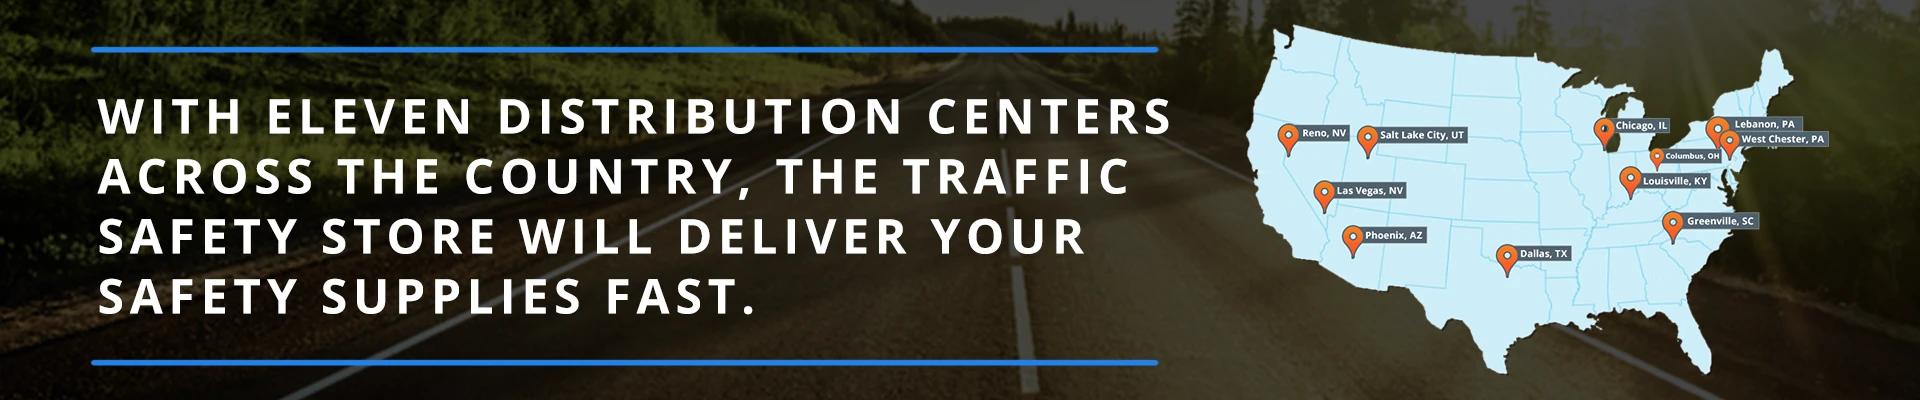 With eleven distribution centers accross the country, the traffic safety store will deliver your safety supplies fast